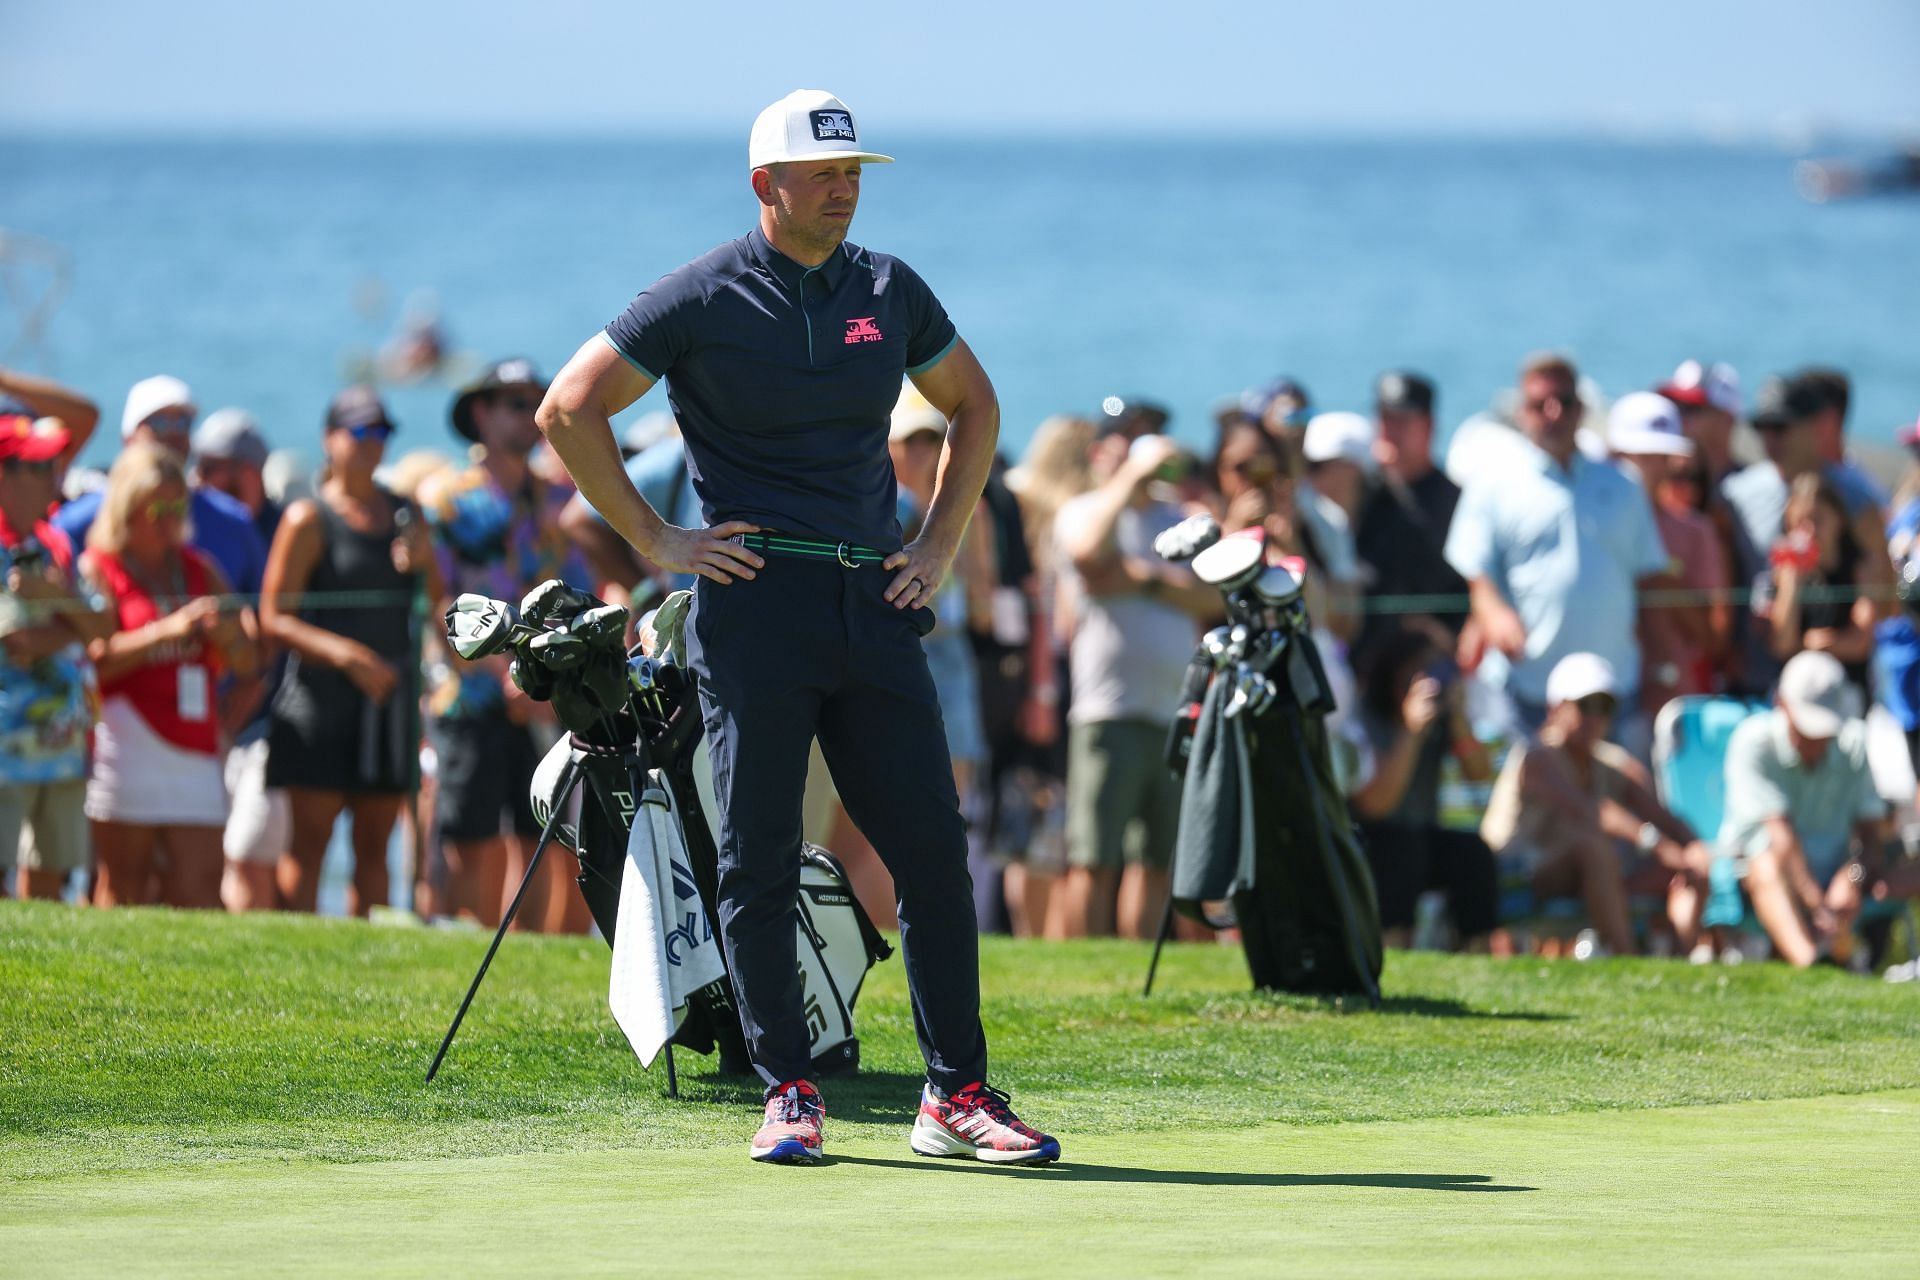 Steph Curry is playing pro golf event. Anybody got a problem with that? –  East Bay Times